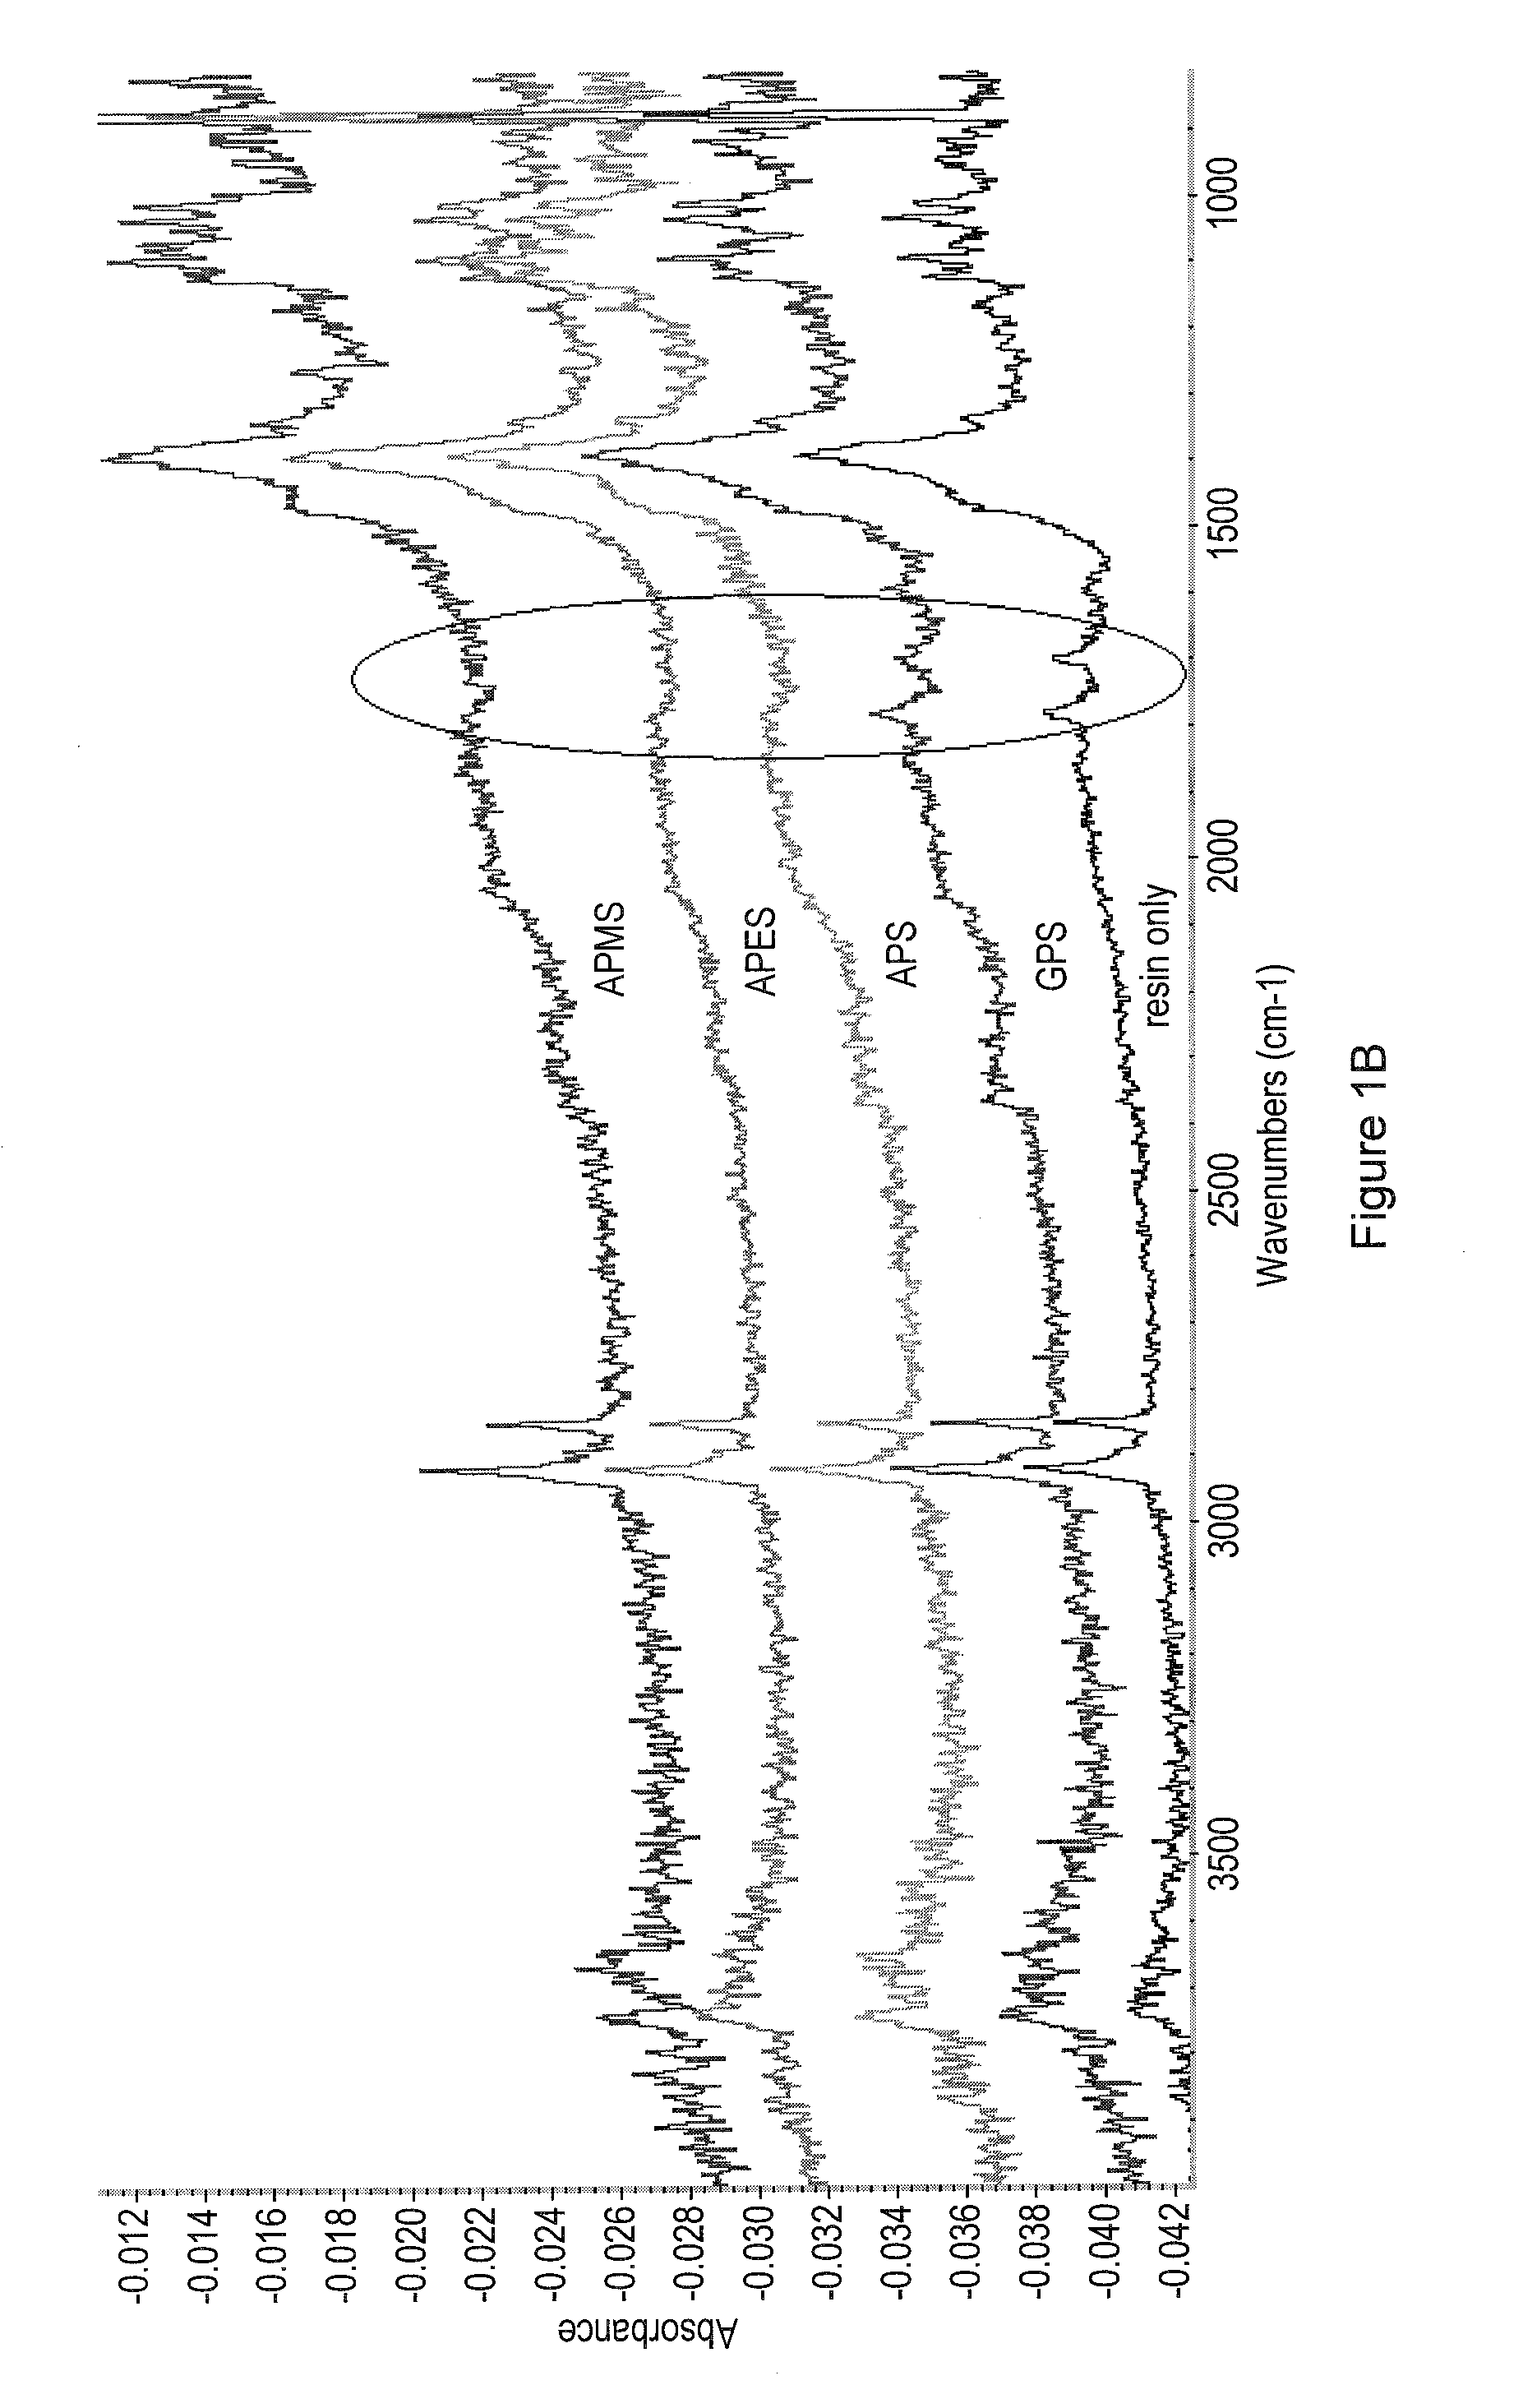 Method for improving the durability of an ink printed on a substrate and substrate formed from such a method